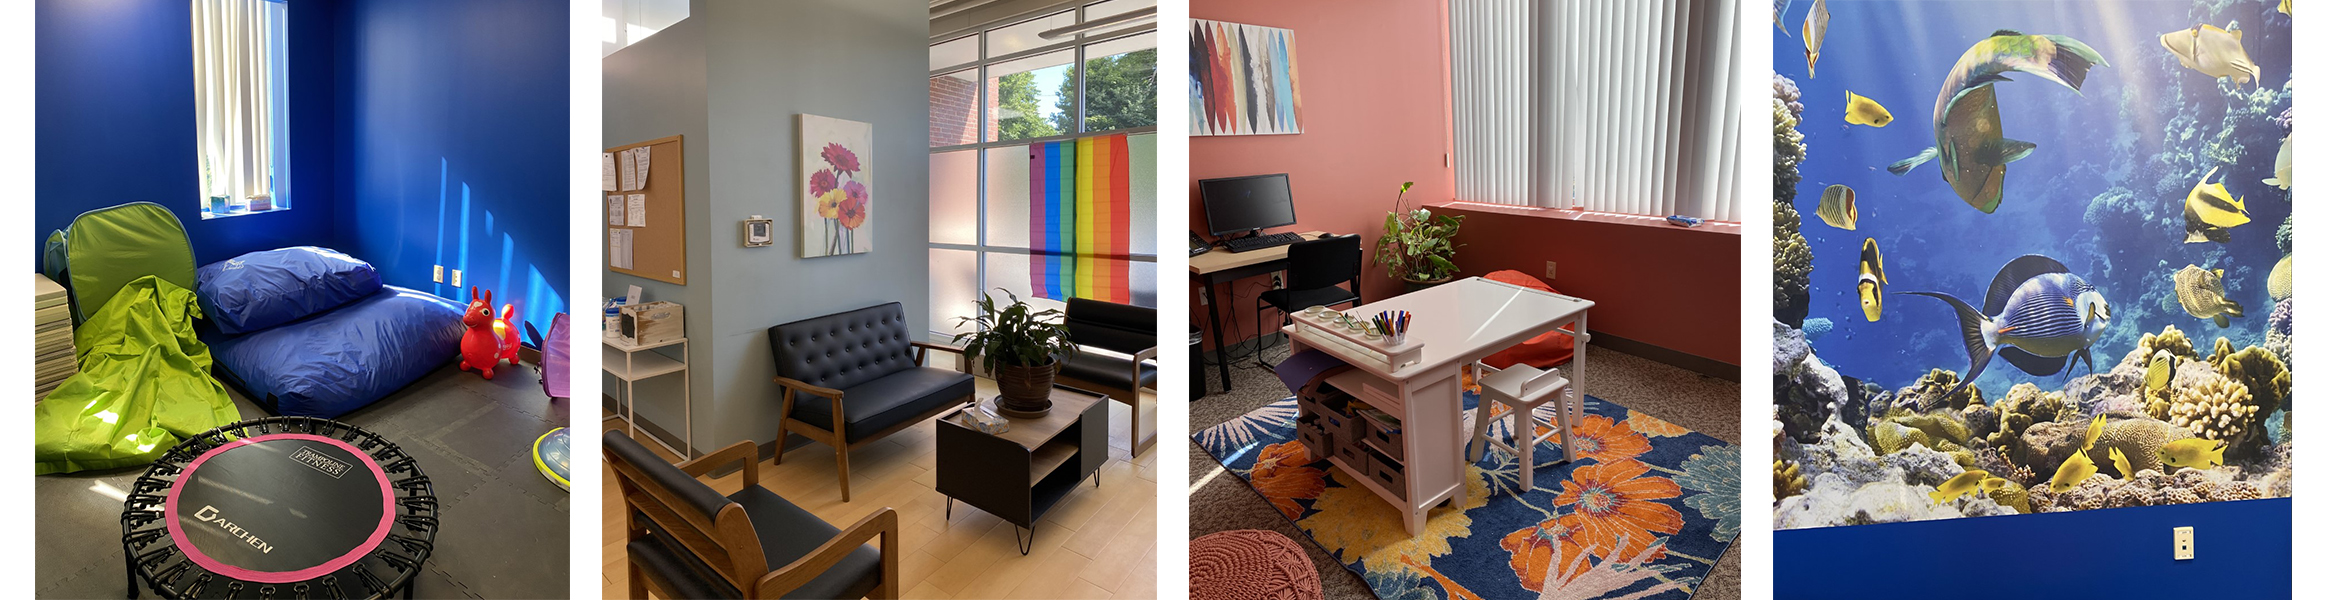 SMART Room, Waiting Room with Pride Flag and Fish